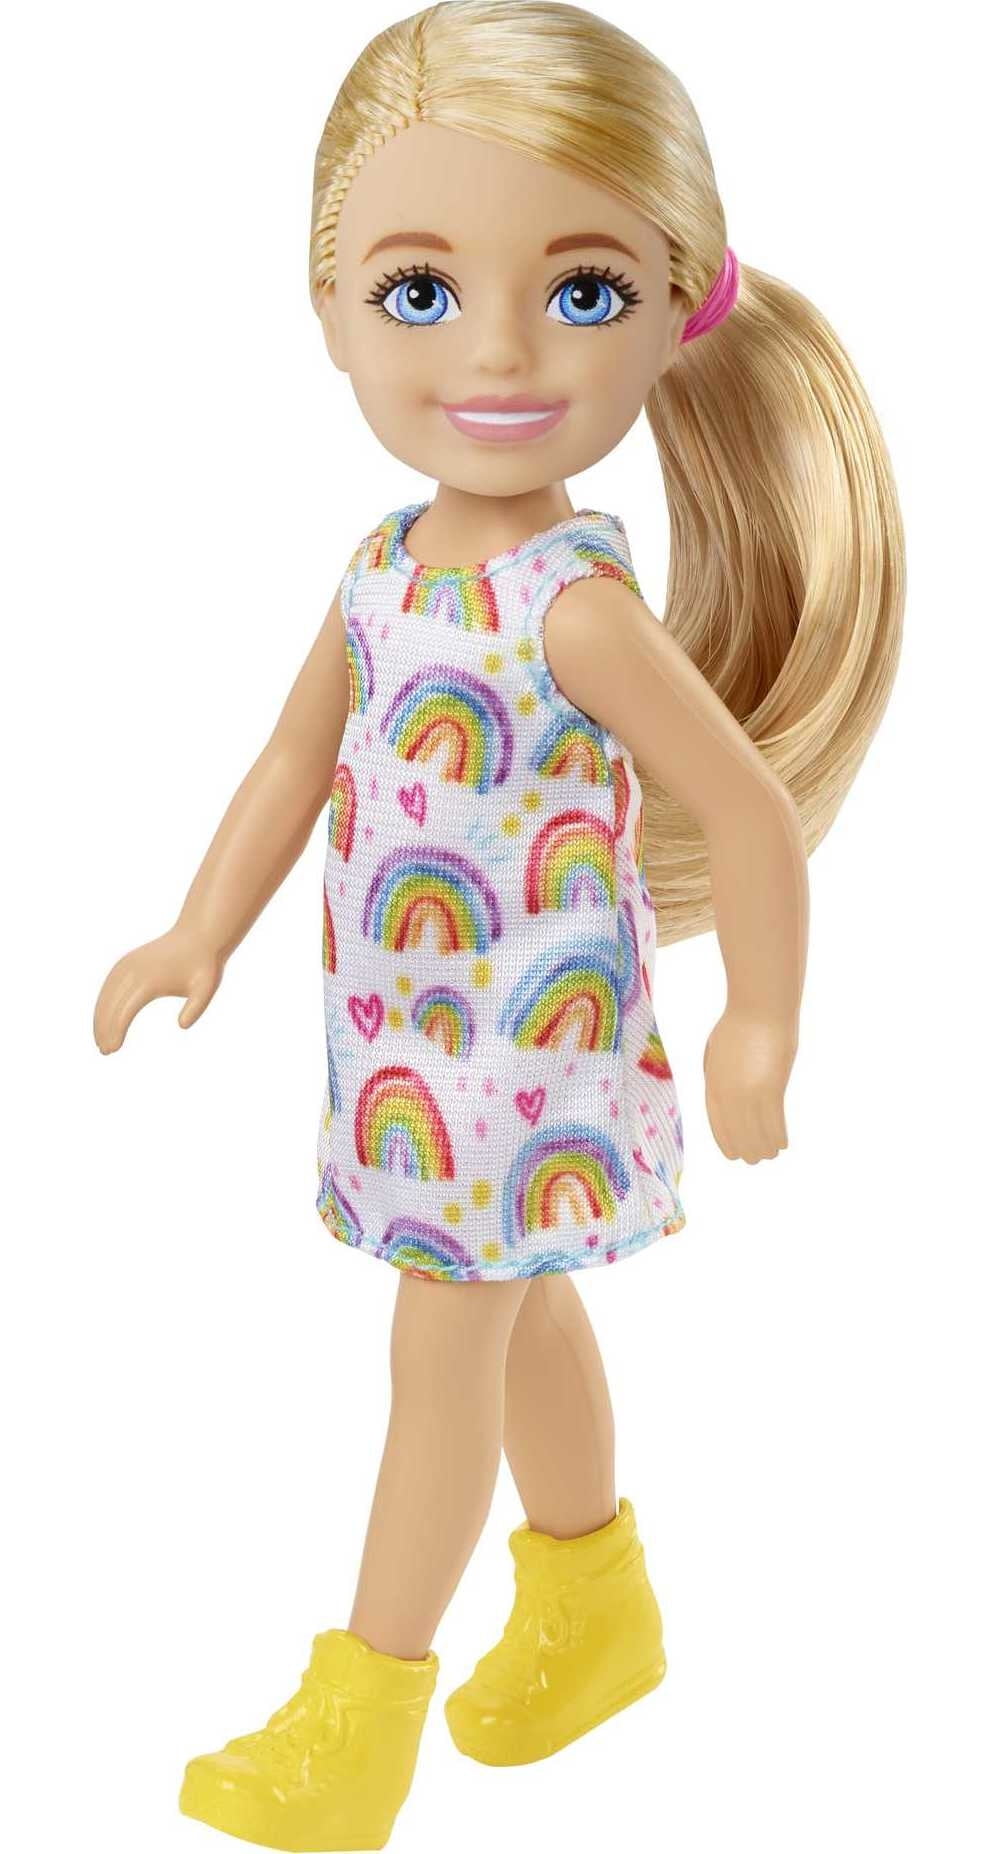 Barbie Chelsea Doll (Blonde) In Rainbow Dress, Toy For 3 Year Olds & Up